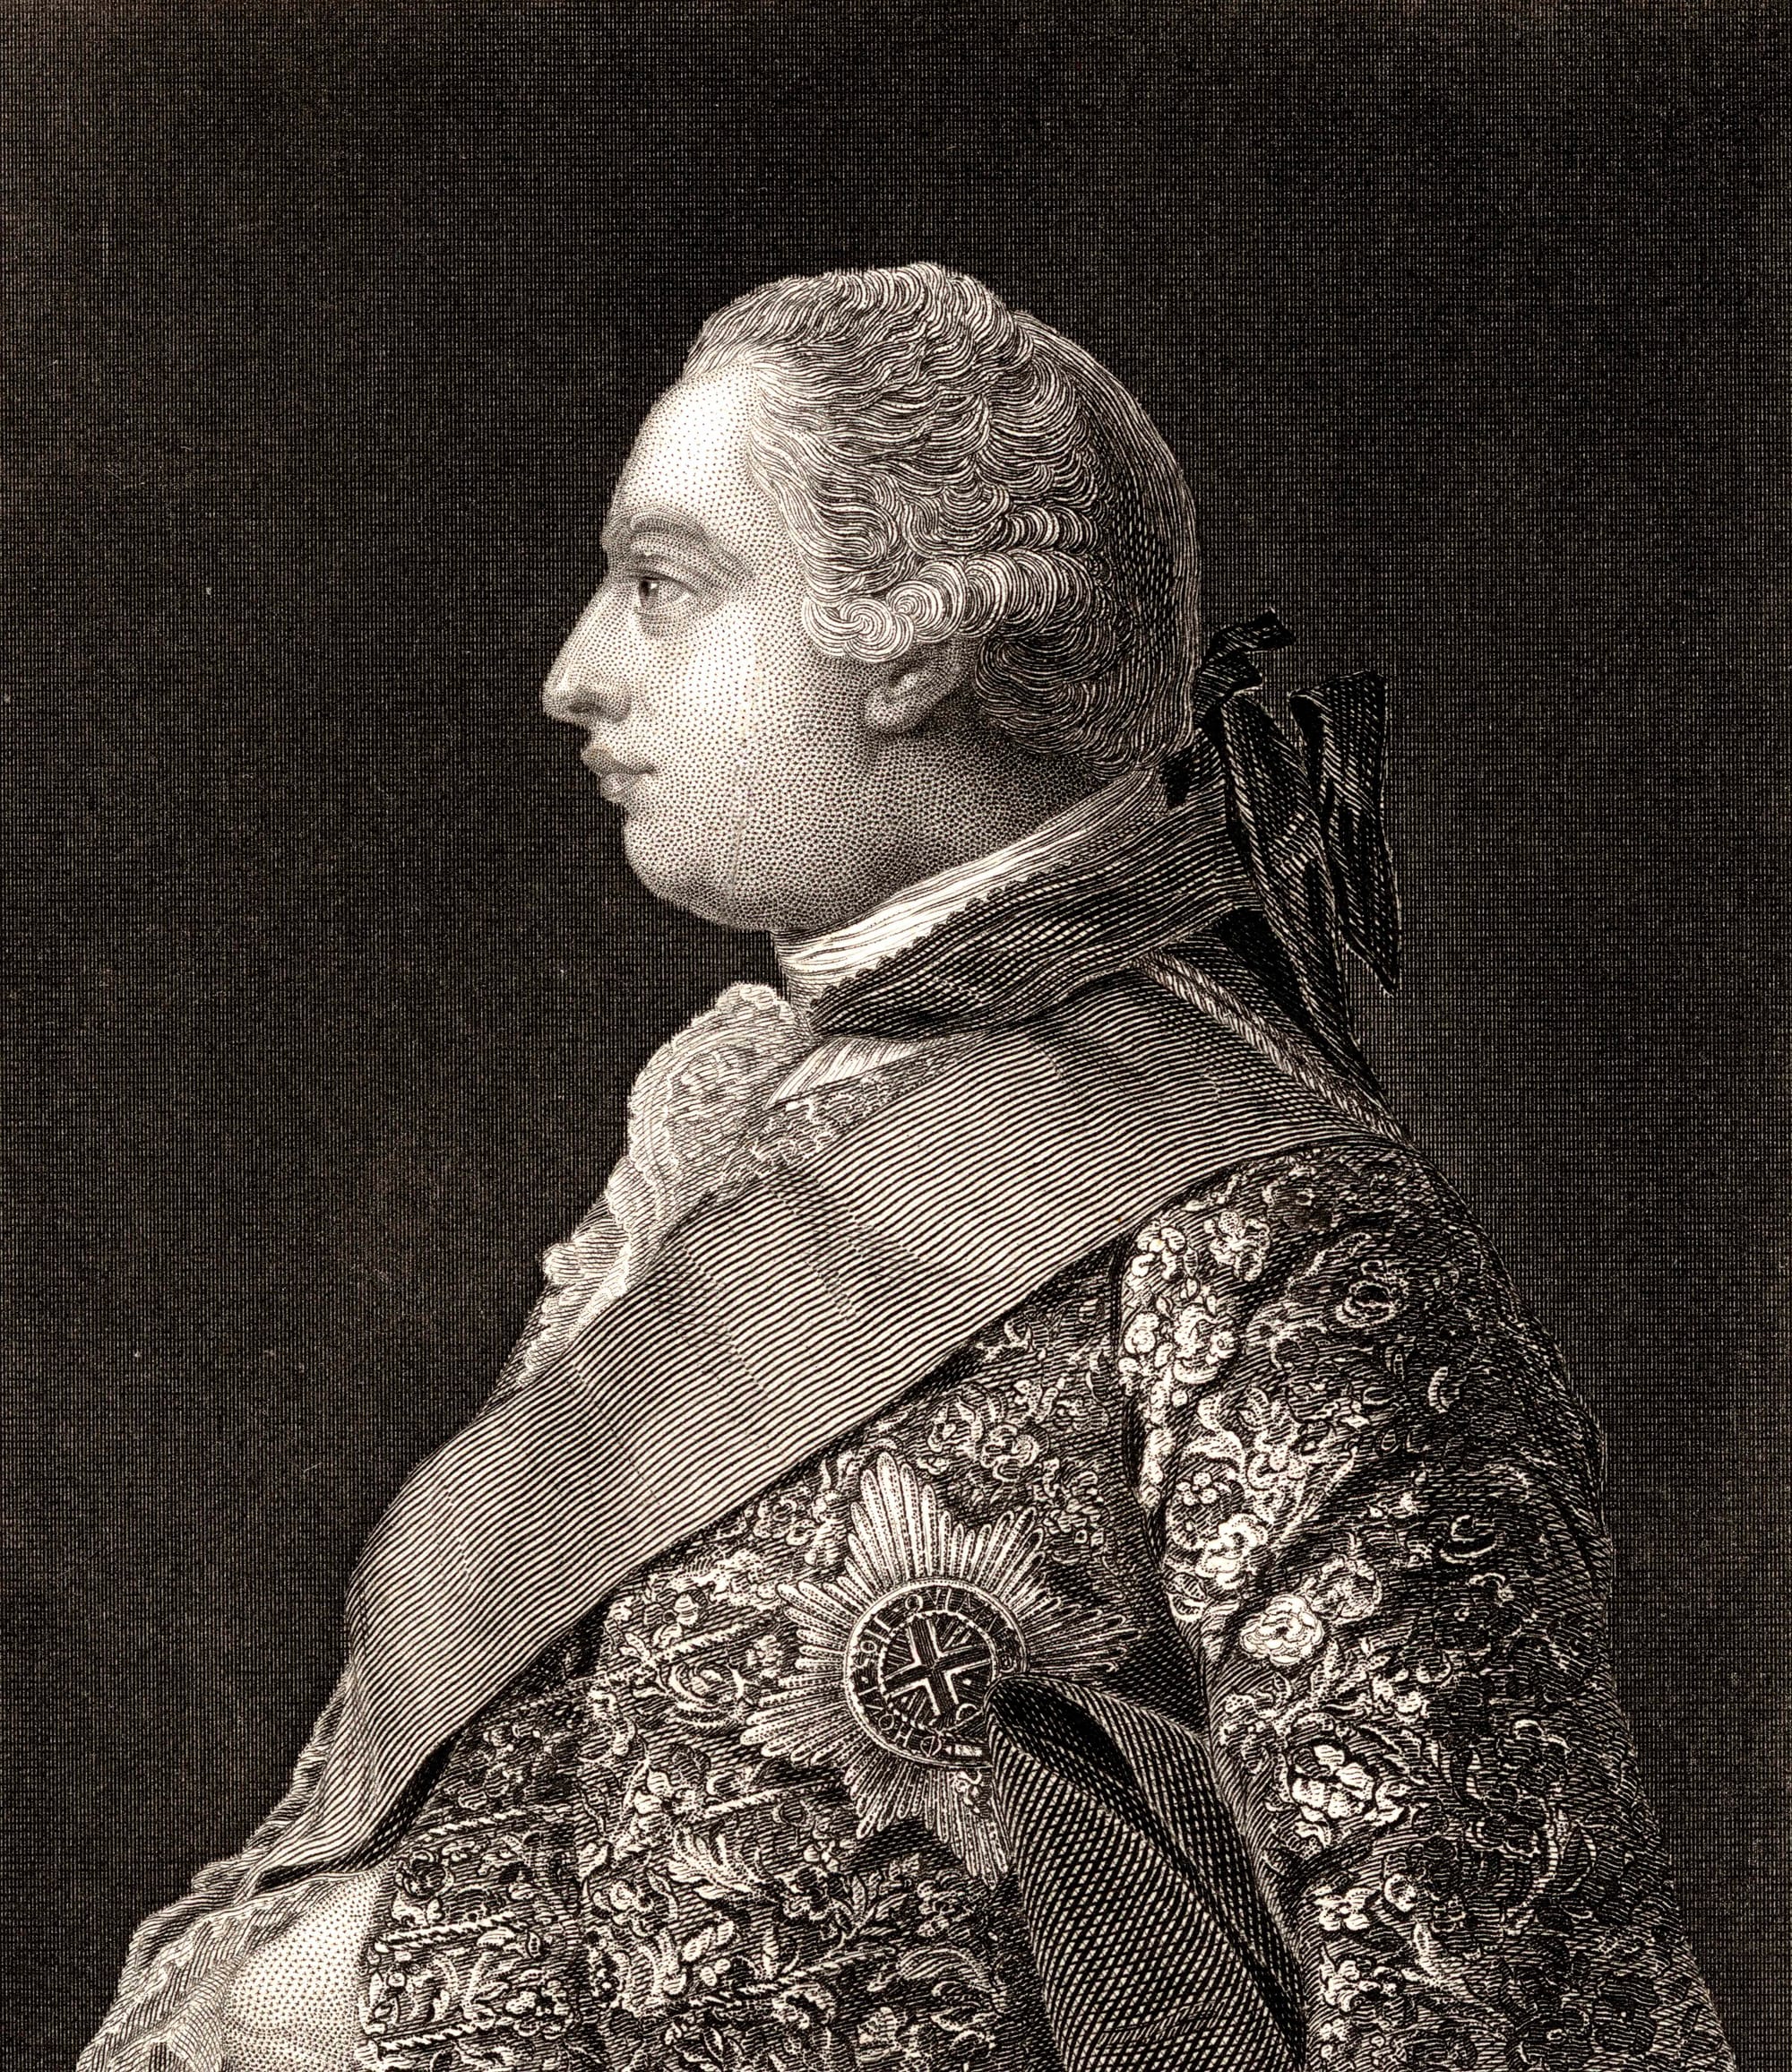 Profile of King George wearing a jacket of fine fabric